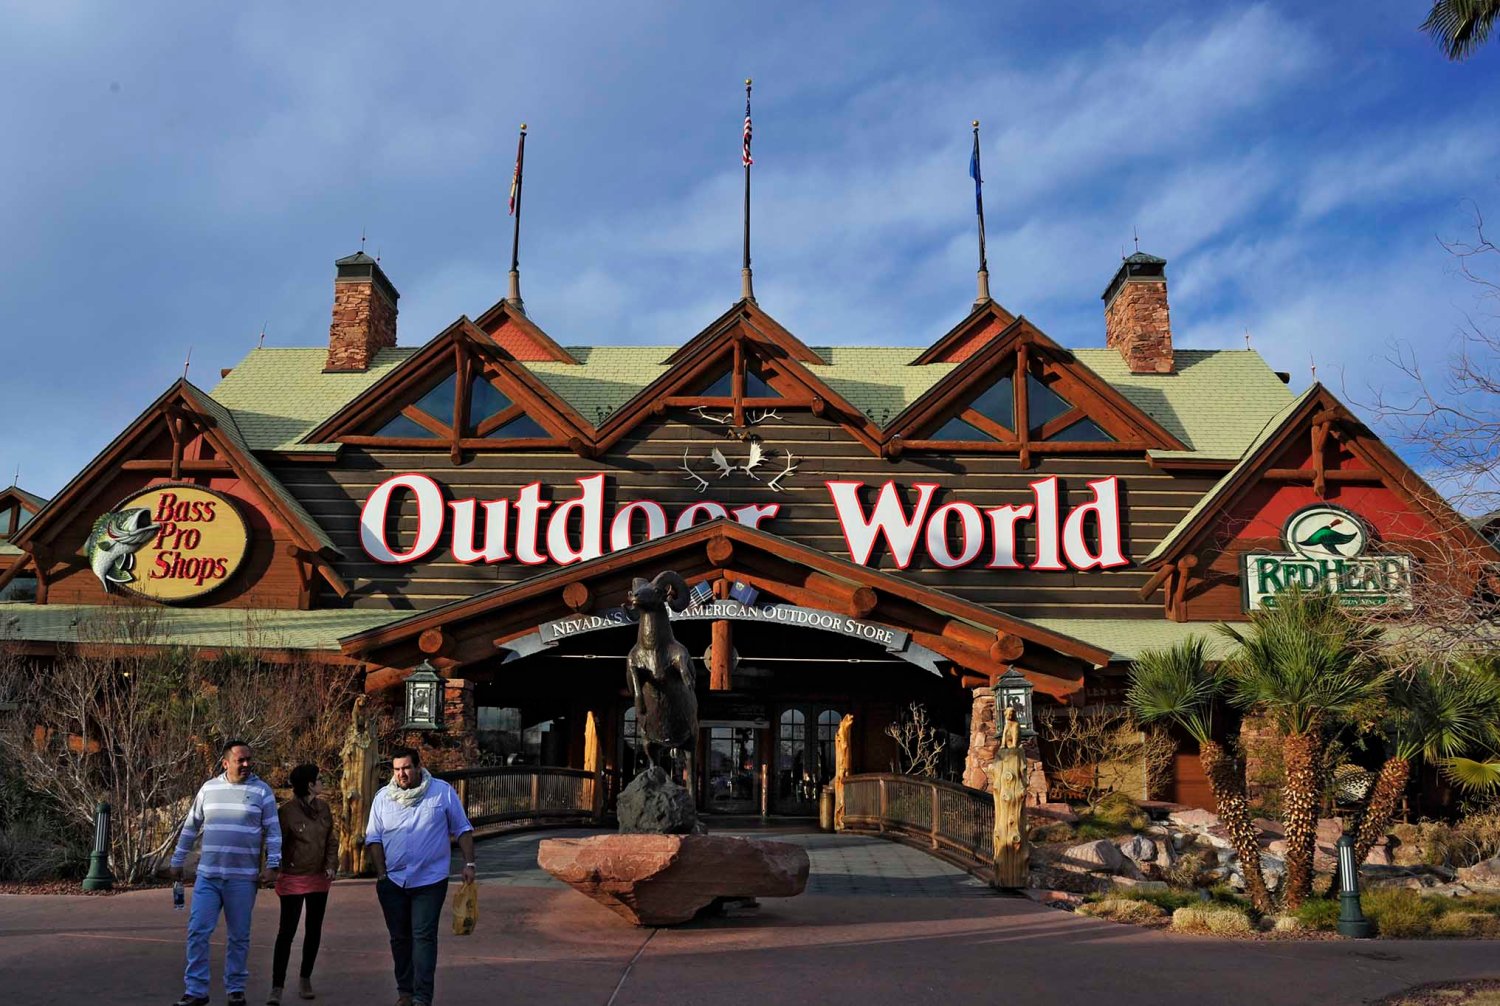 The Las Vegas Bass Pro Shops Outdoor World” Store All4shooters